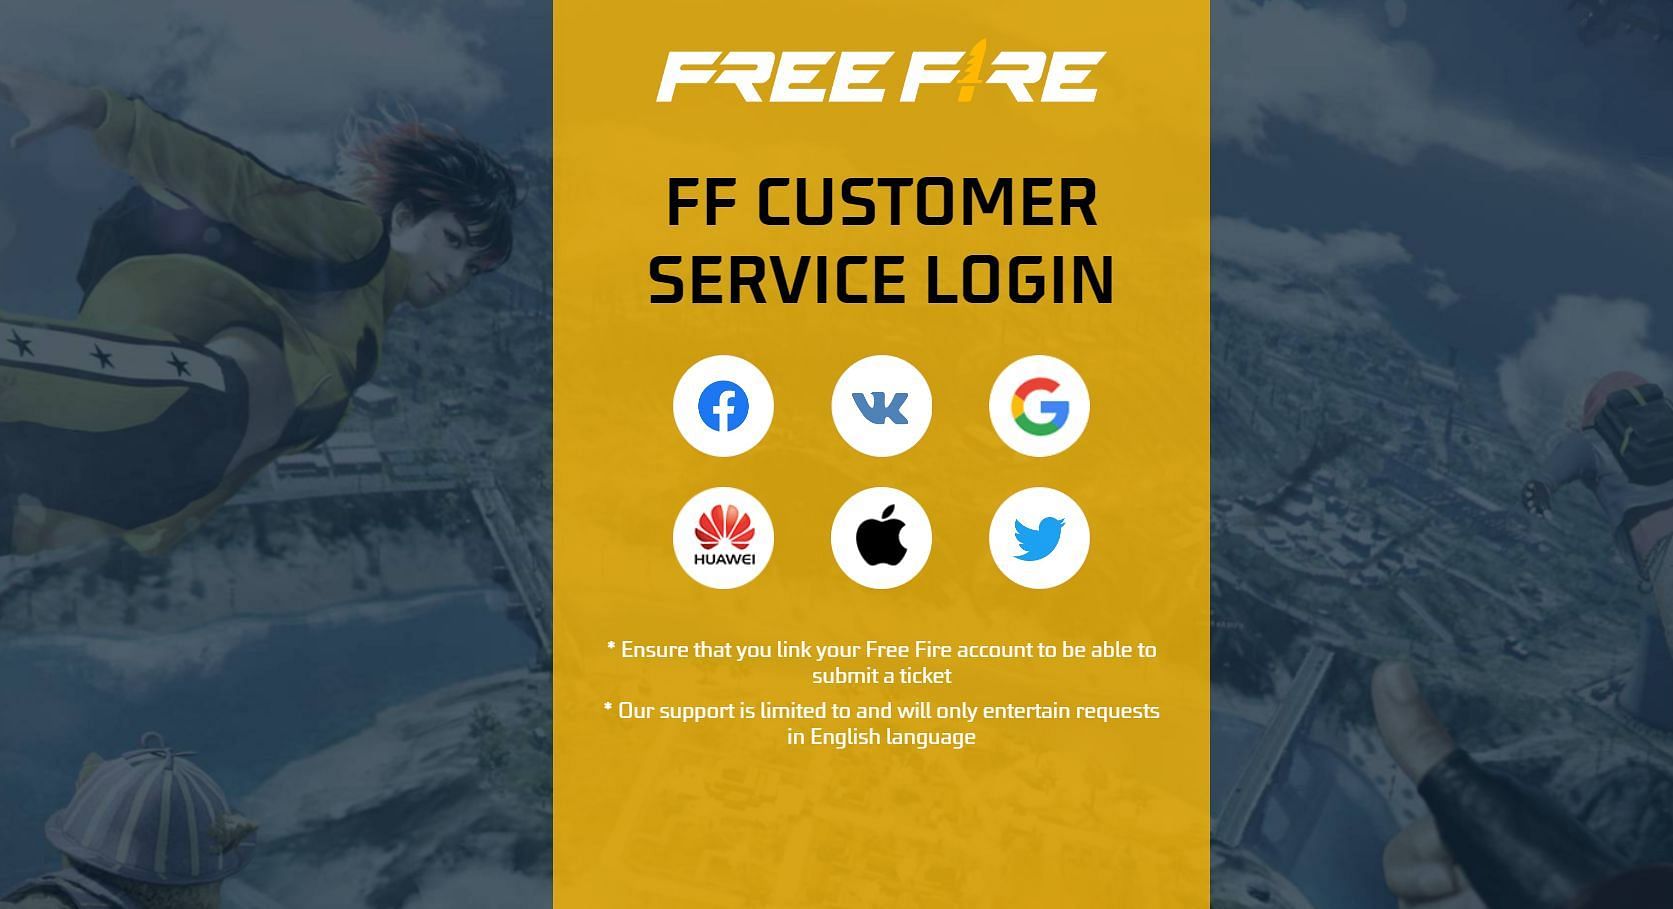 Garena Free Fire Customer Service Phone Number, Email, Help Center